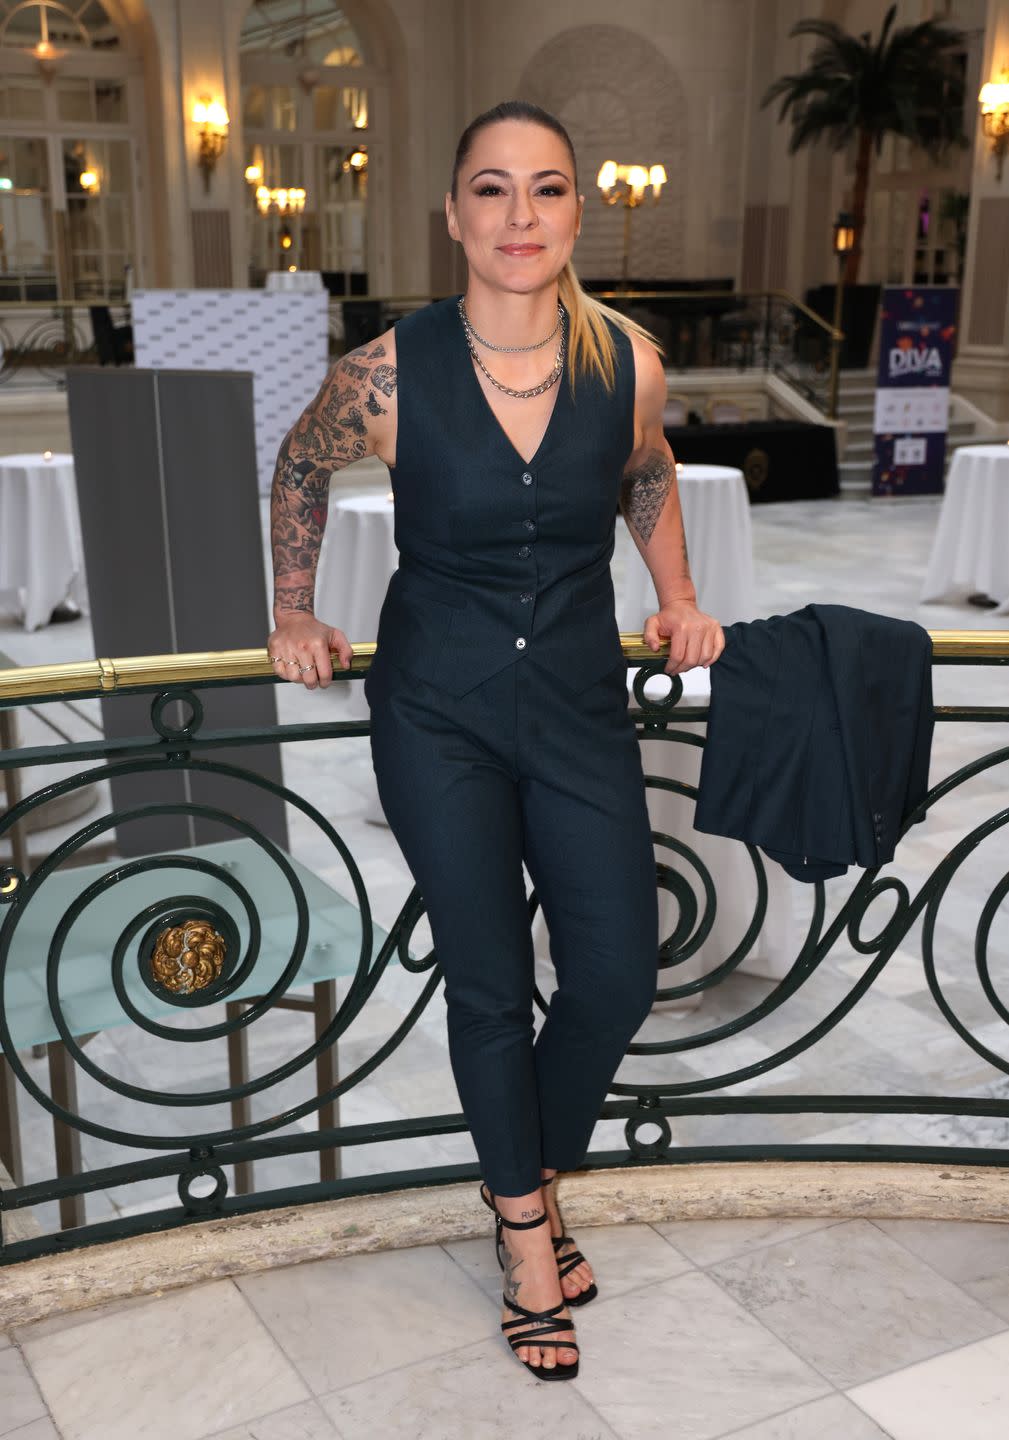 lucy spraggan stands on a balcony overlooking a hotel reception area at an awards ceremony